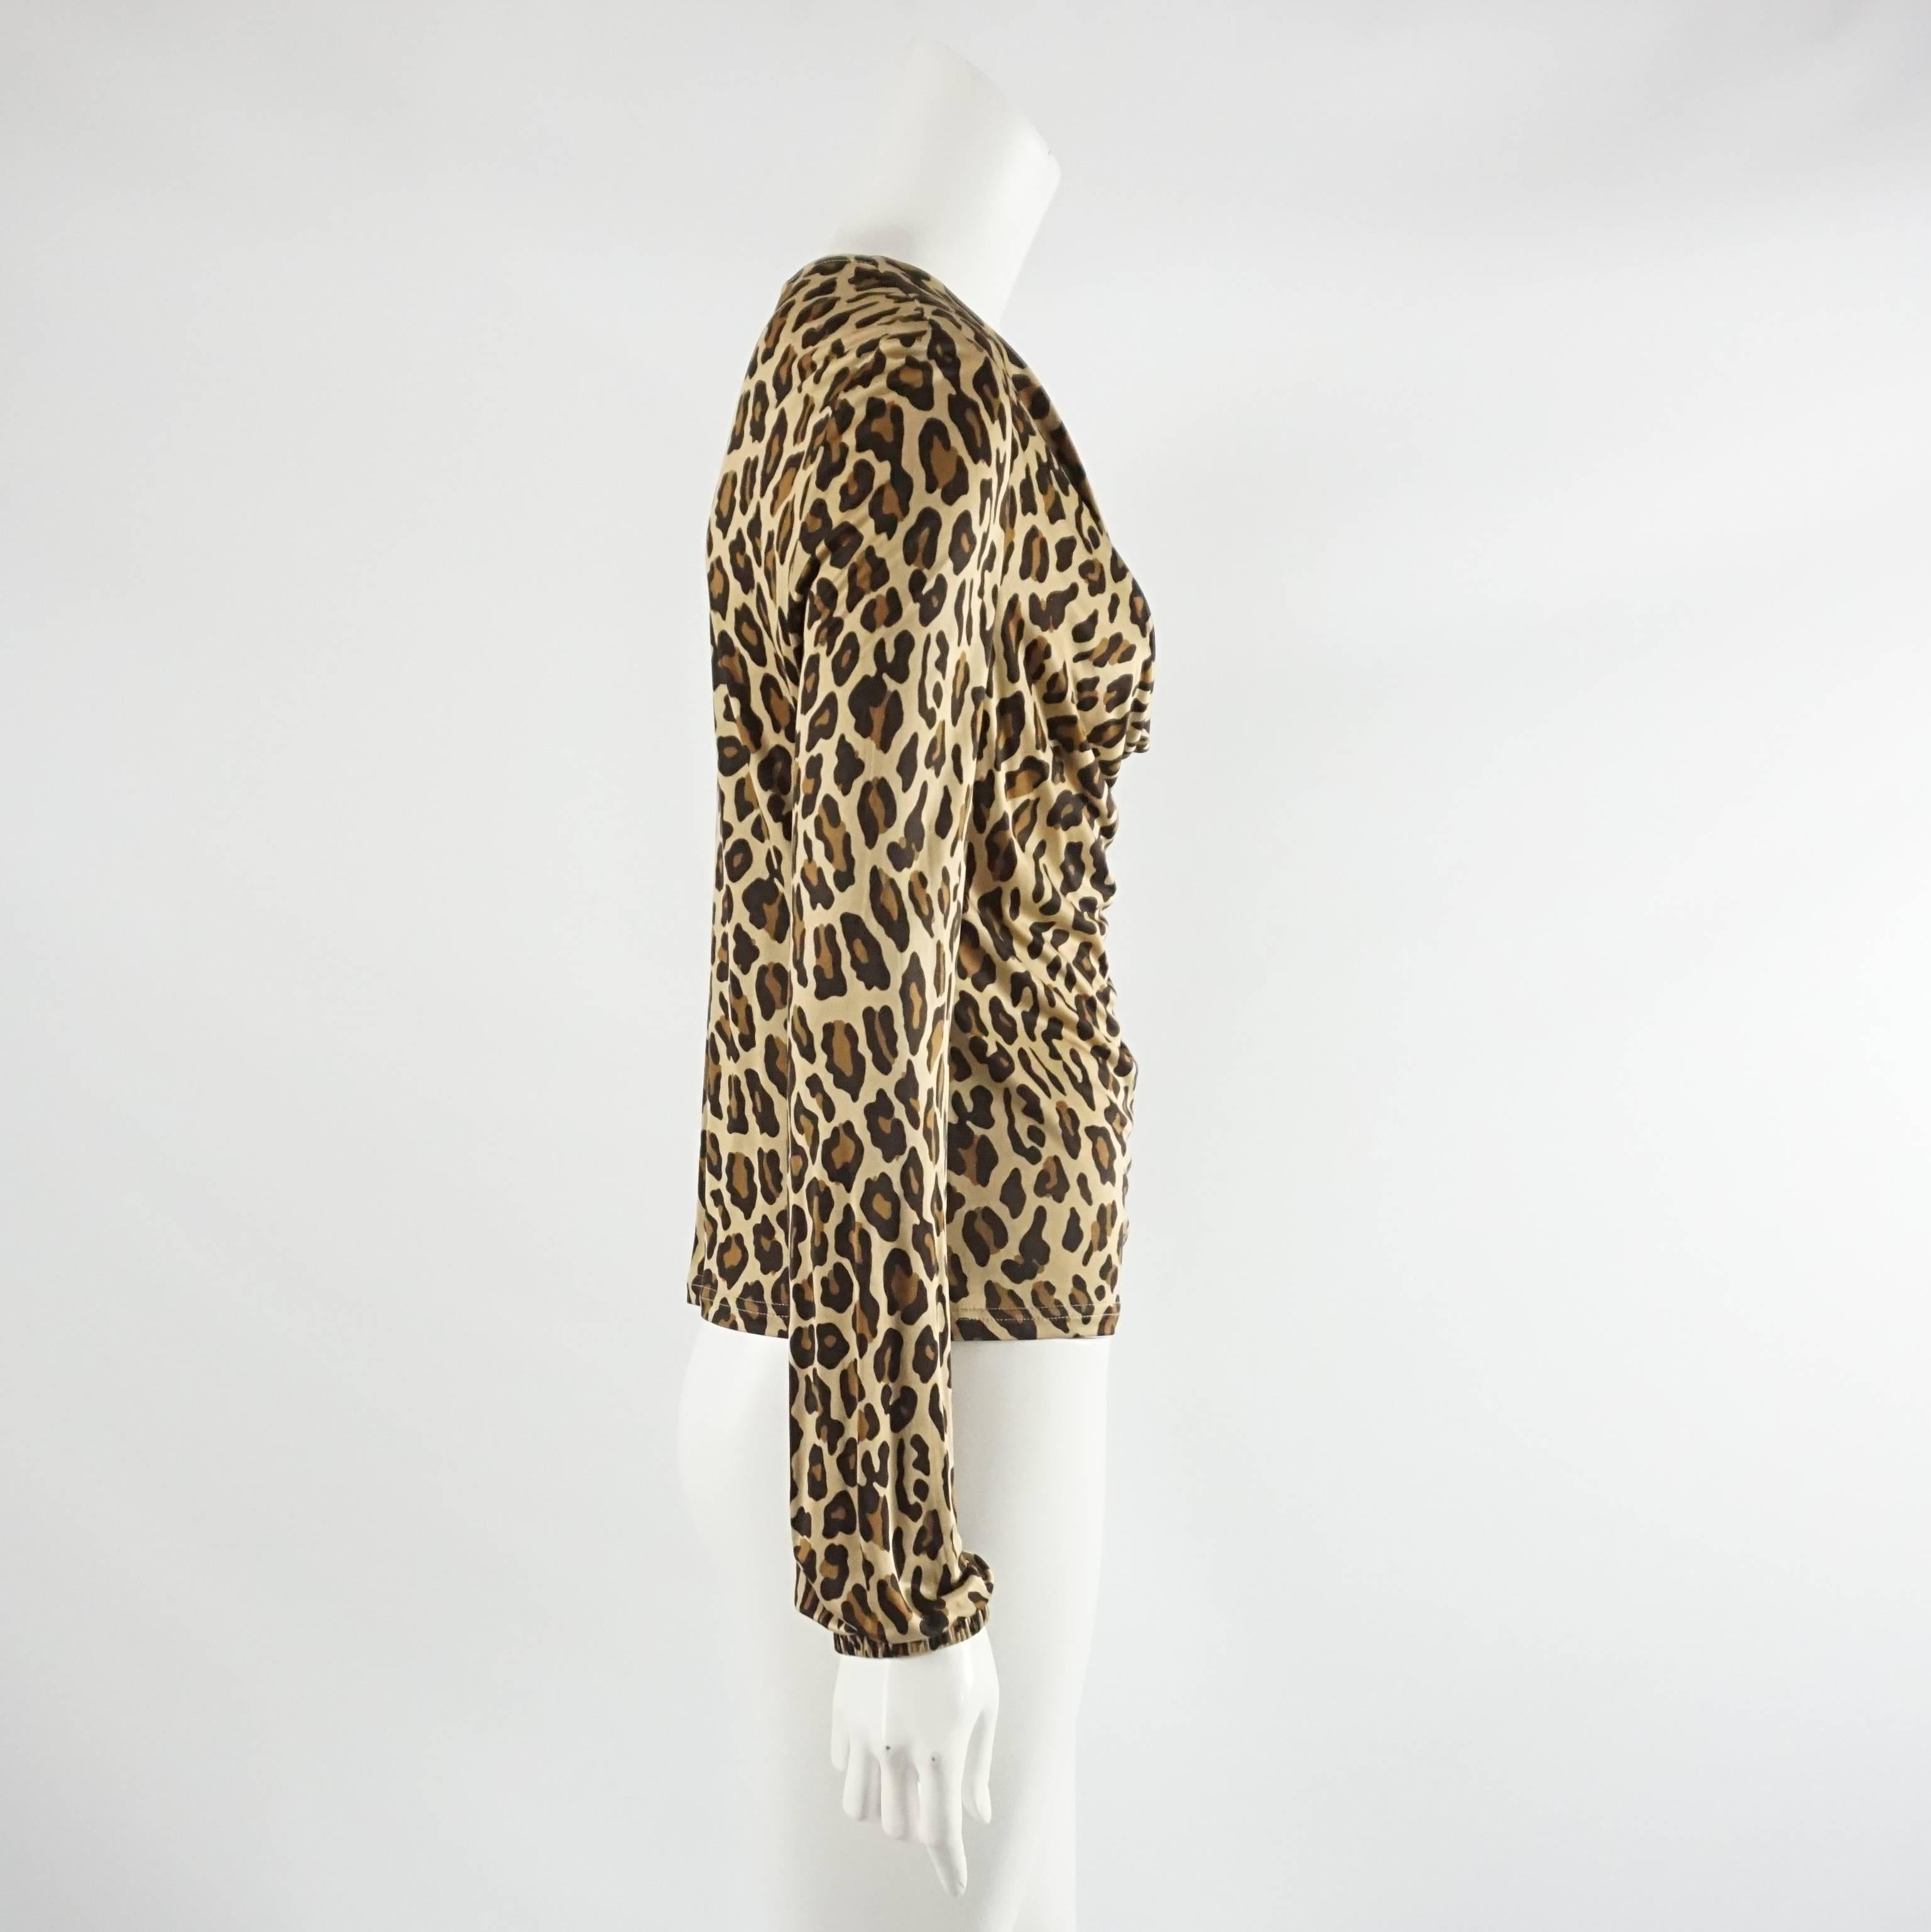 This Celine animal print long sleeve blouse is made of jersey and has a swoop neck. The piece is in fair condition with several small areas of discoloration and small pulls as seen in the images. Size S, circa 21st century. 

Measurements
Shoulder